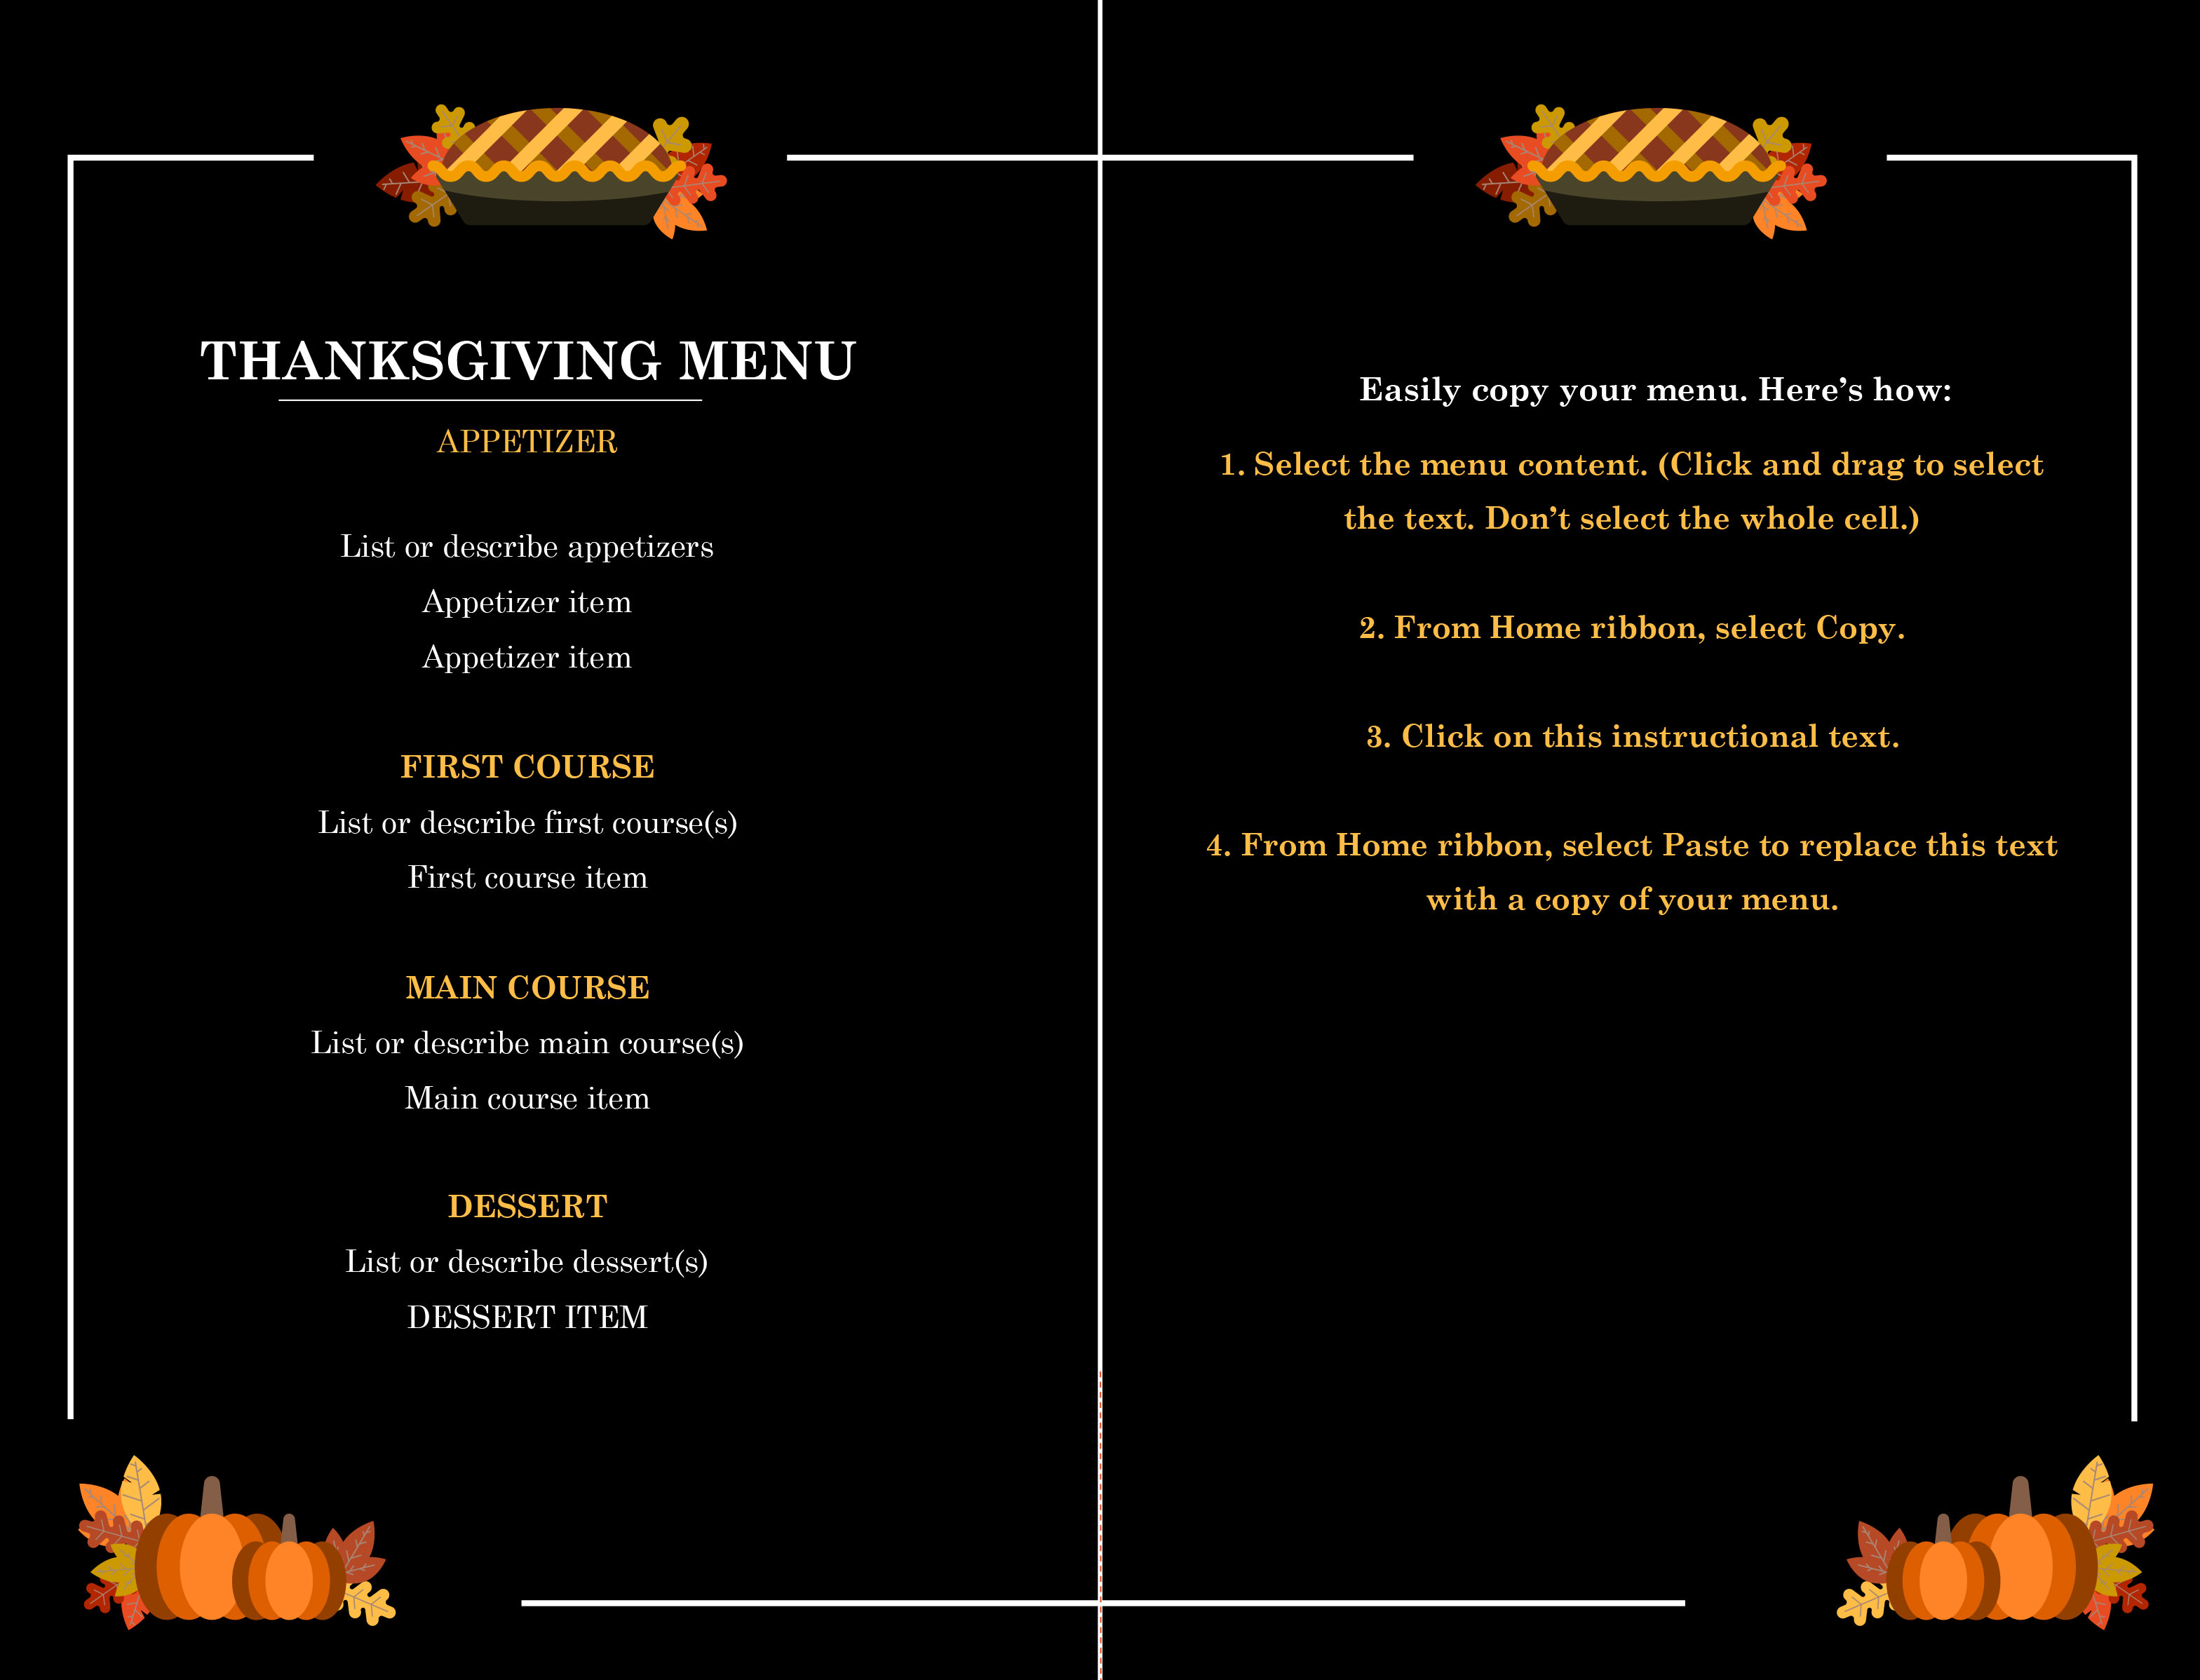 21 Free Simple Menu Templates For Restaurants, Cafes, And Parties Intended For Free Cafe Menu Templates For Word